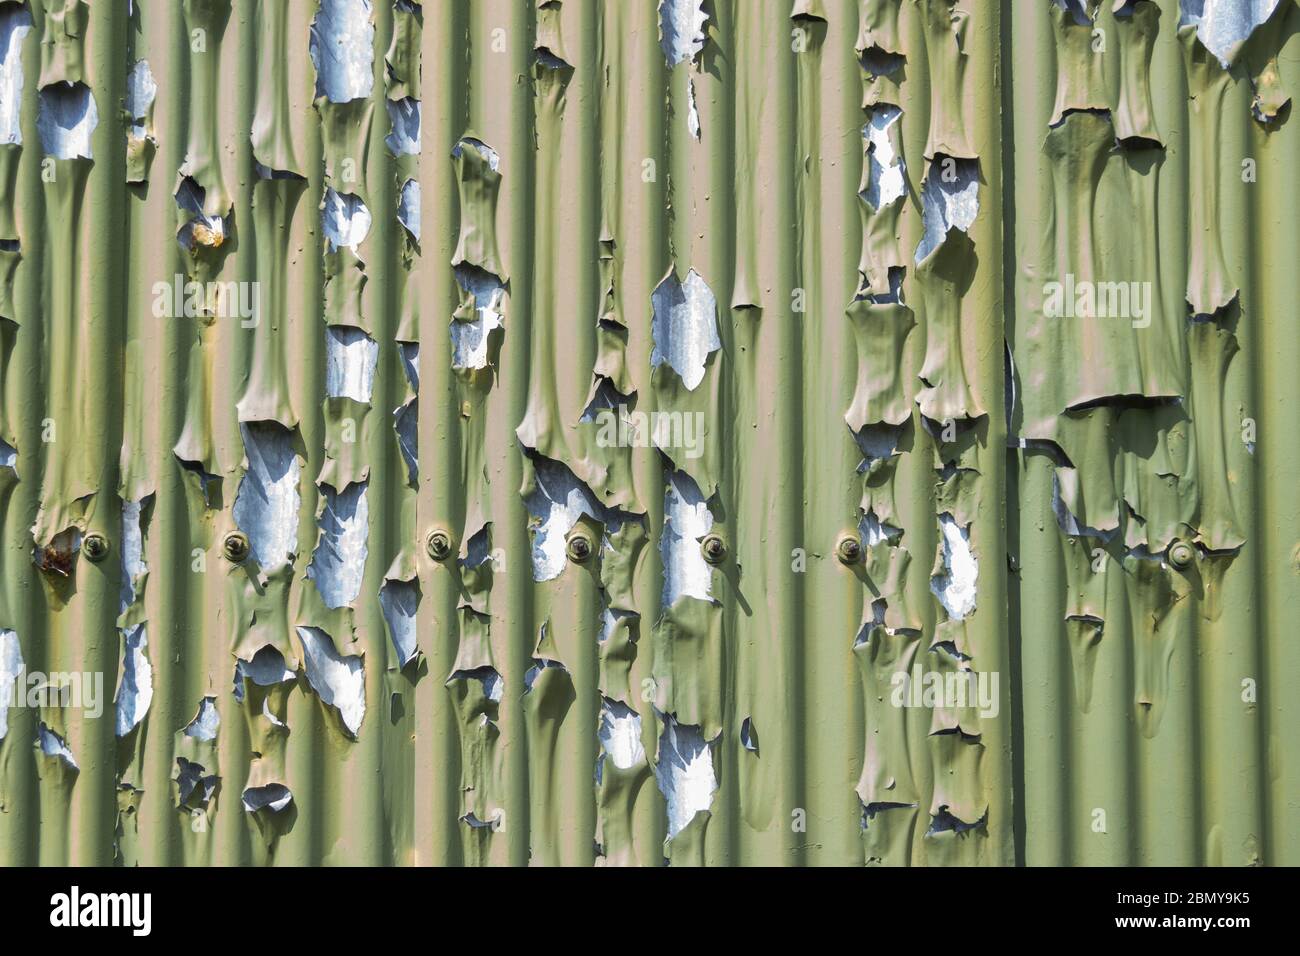 Flaking green paint on a corrugated iron surface, appropriate as a background image Stock Photo